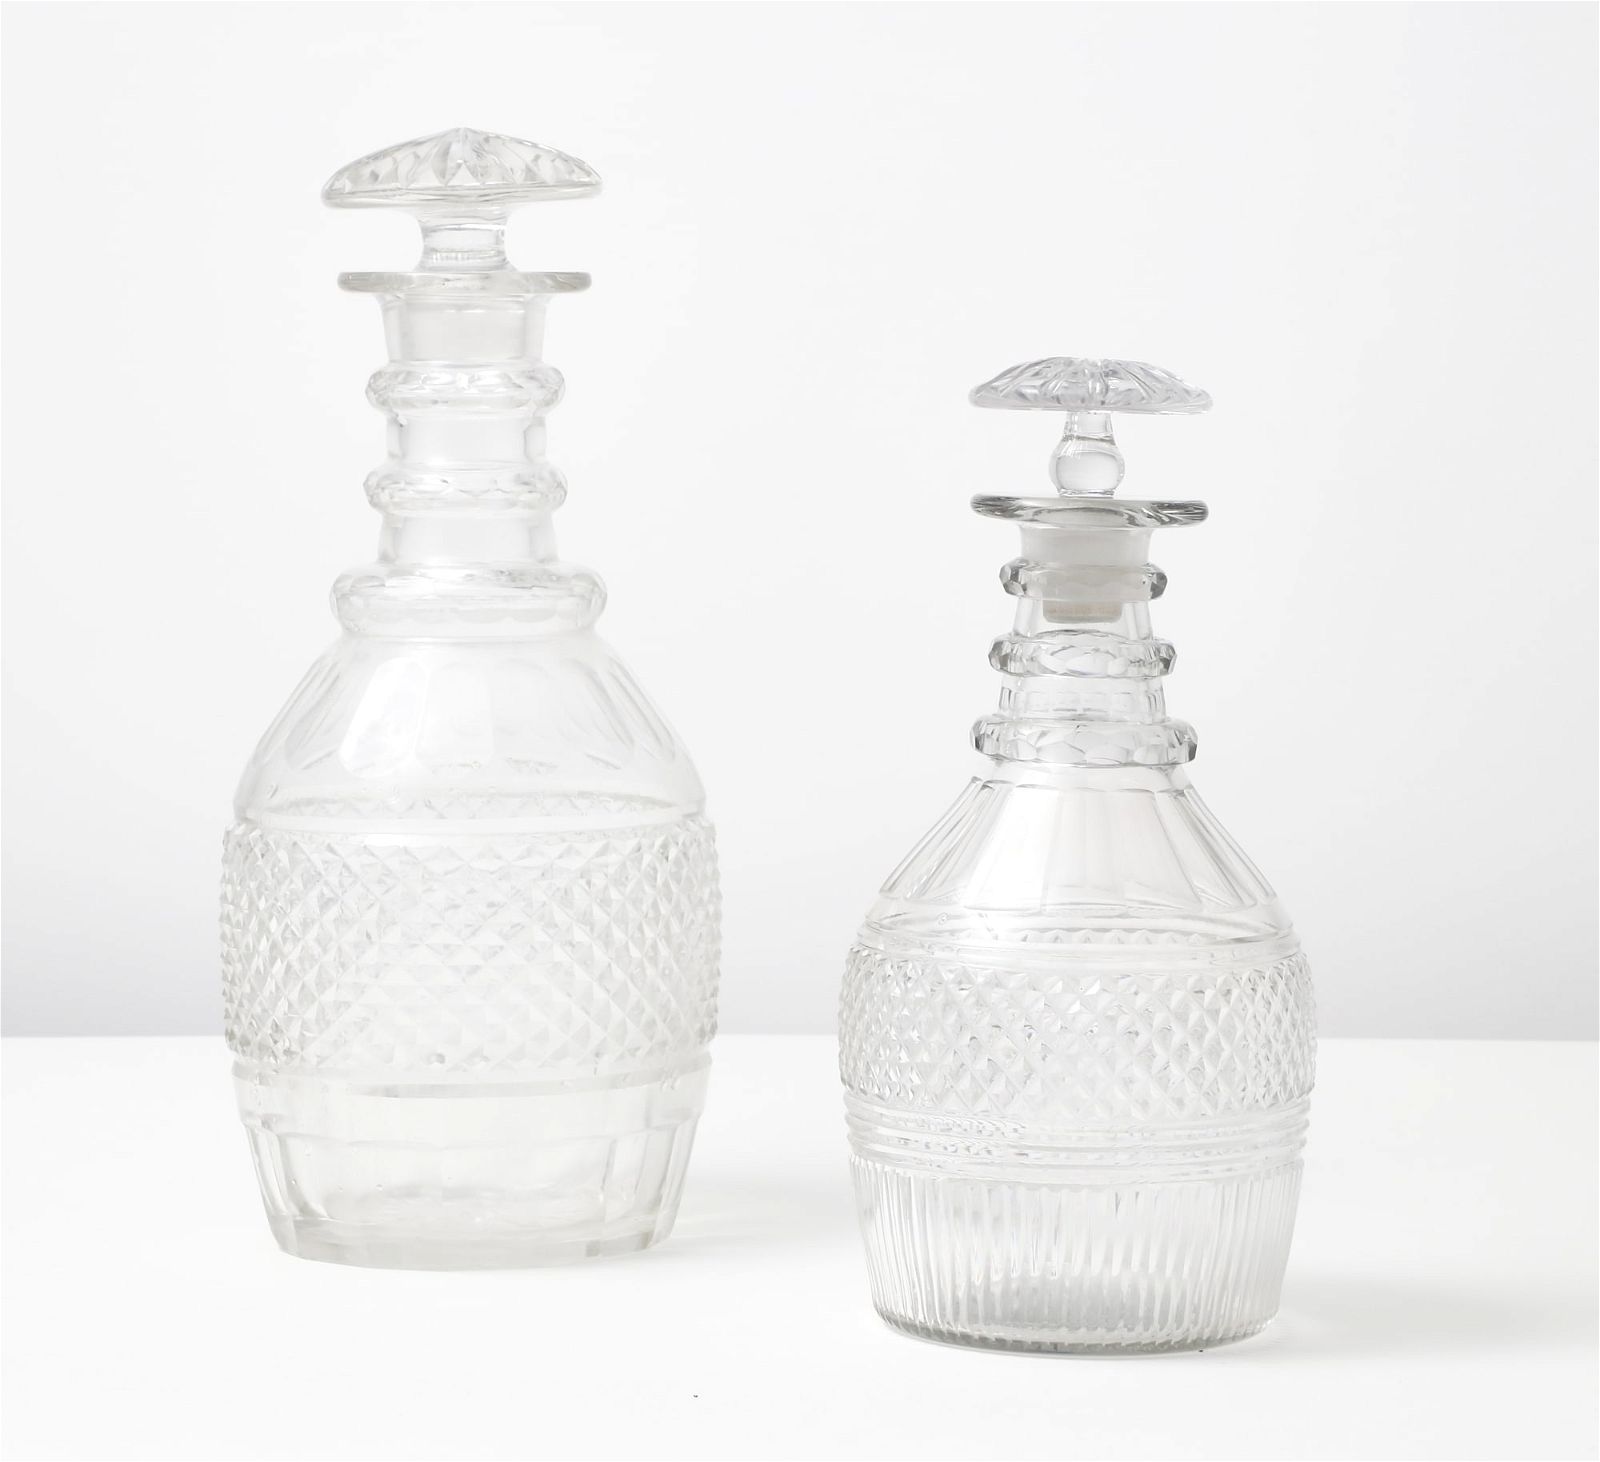 TWO GEORGE III GLASS DECANTERS